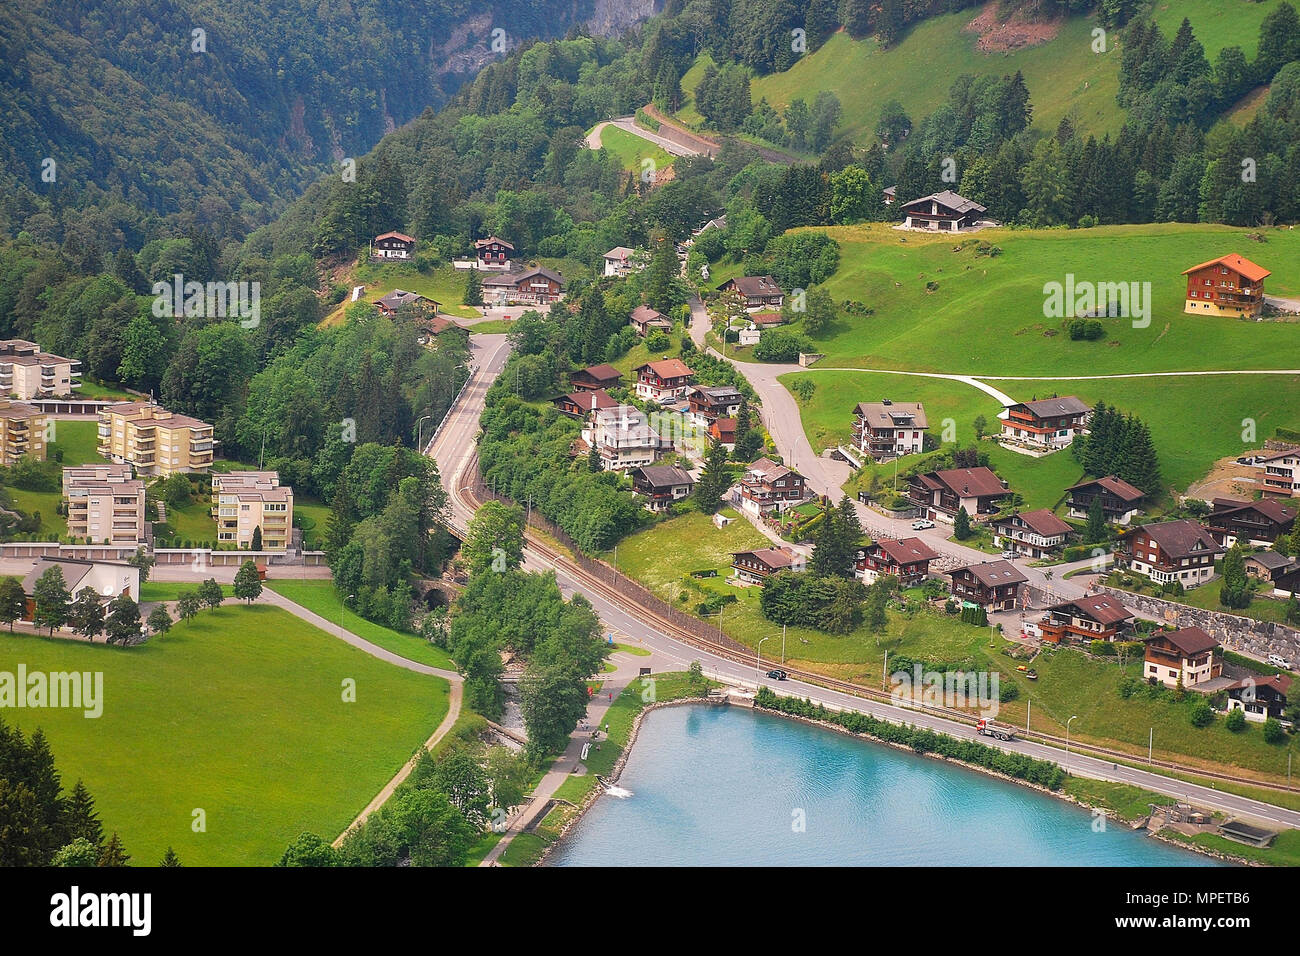 Lake Eugenisee, Engelberg in the canton of Obwalden, Switzerland Stock Photo